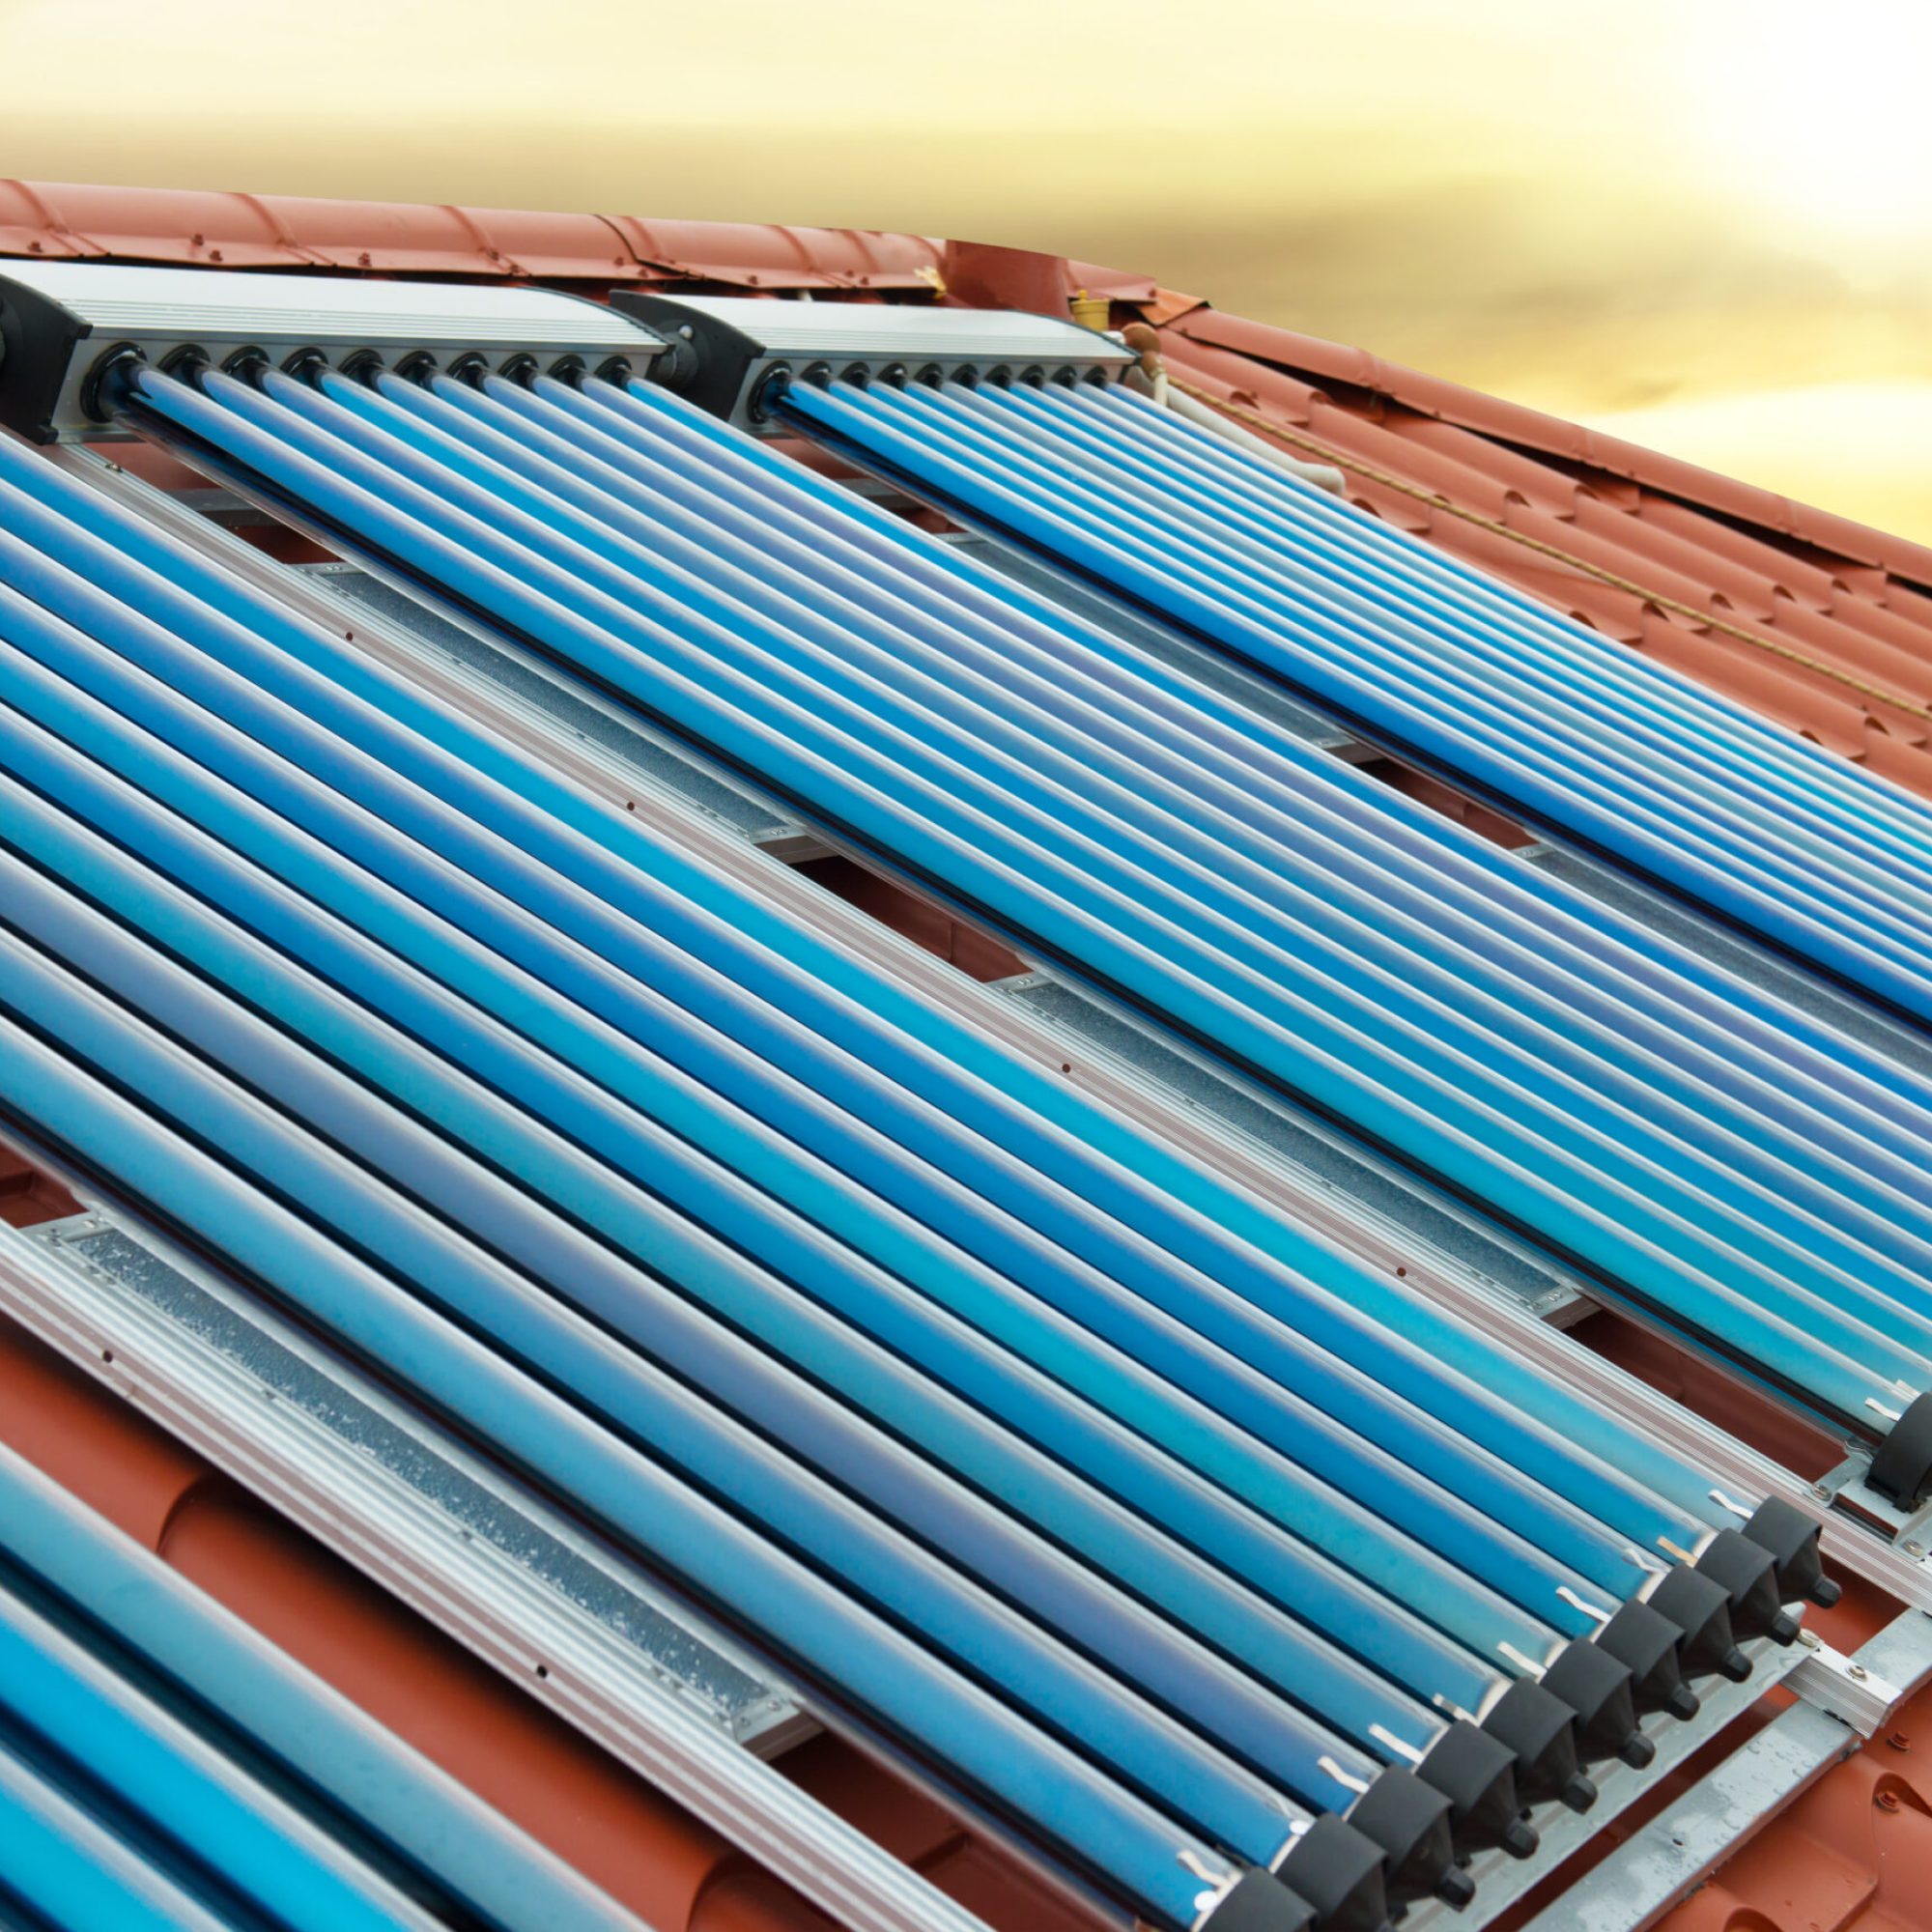 Vacuum collectors- solar water heating system on red roof of the house under shining sun